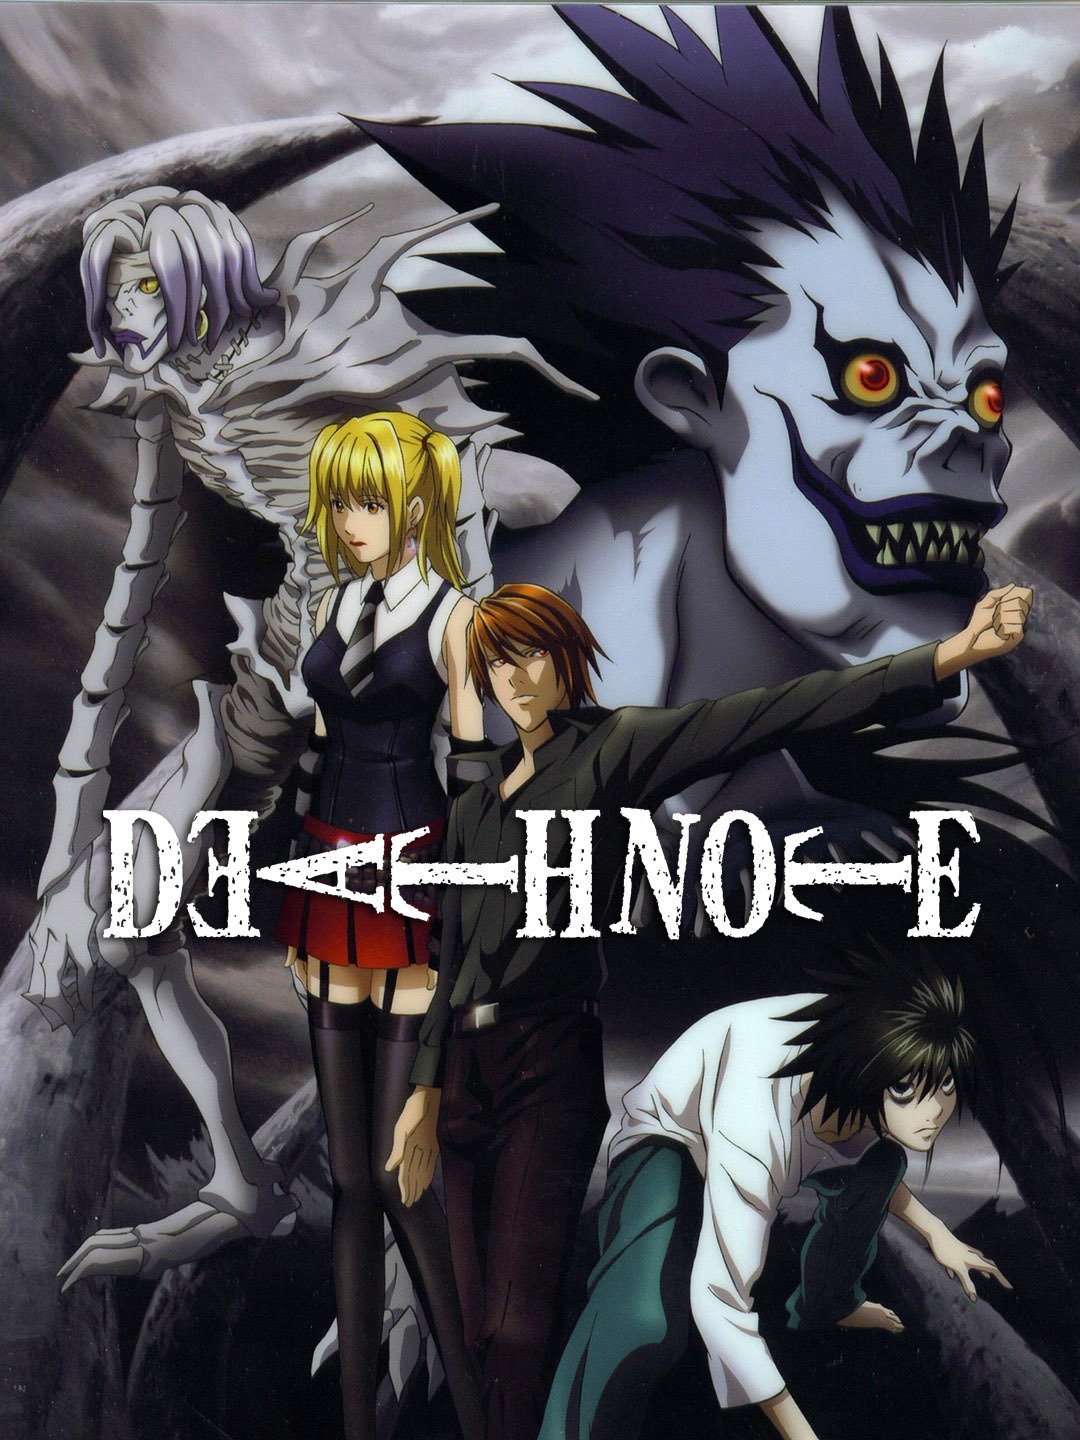 44 Dark Death Note Facts That Every Fan Should Know